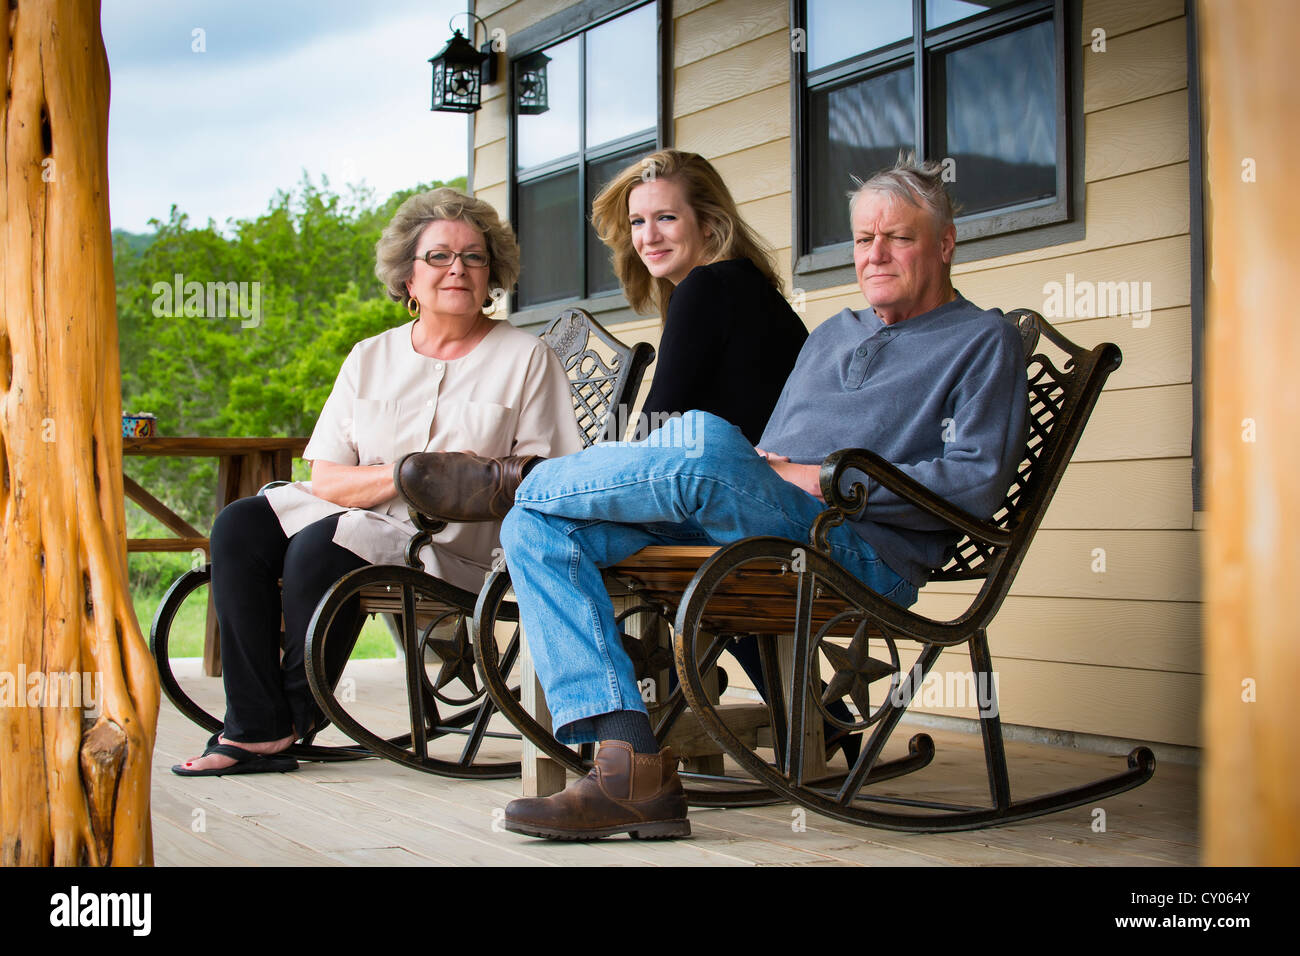 Family portrait of three mature people, parents and 35 years old daughter on the front porch of their house Stock Photo